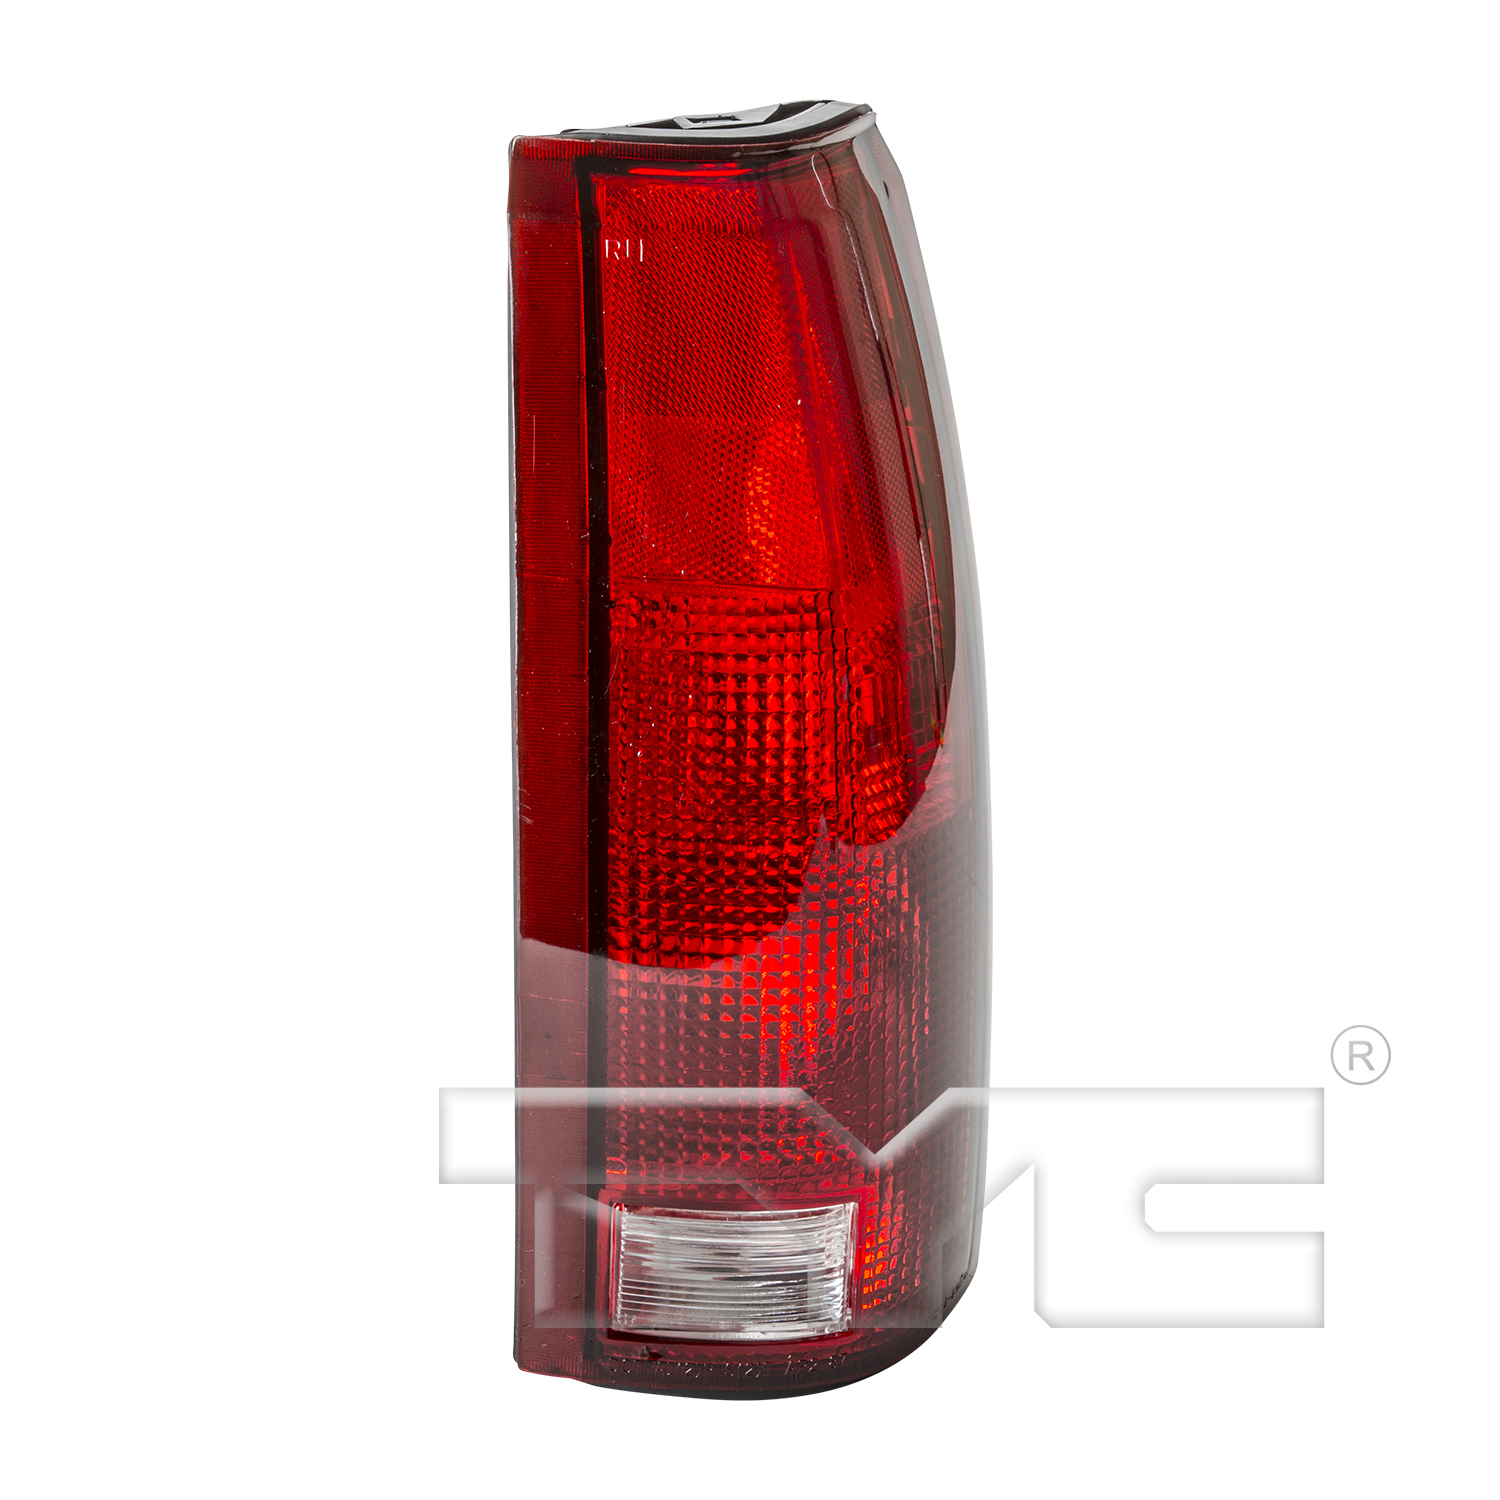 Aftermarket TAILLIGHTS for CHEVROLET - C1500, C1500,88-99,RT Taillamp lens